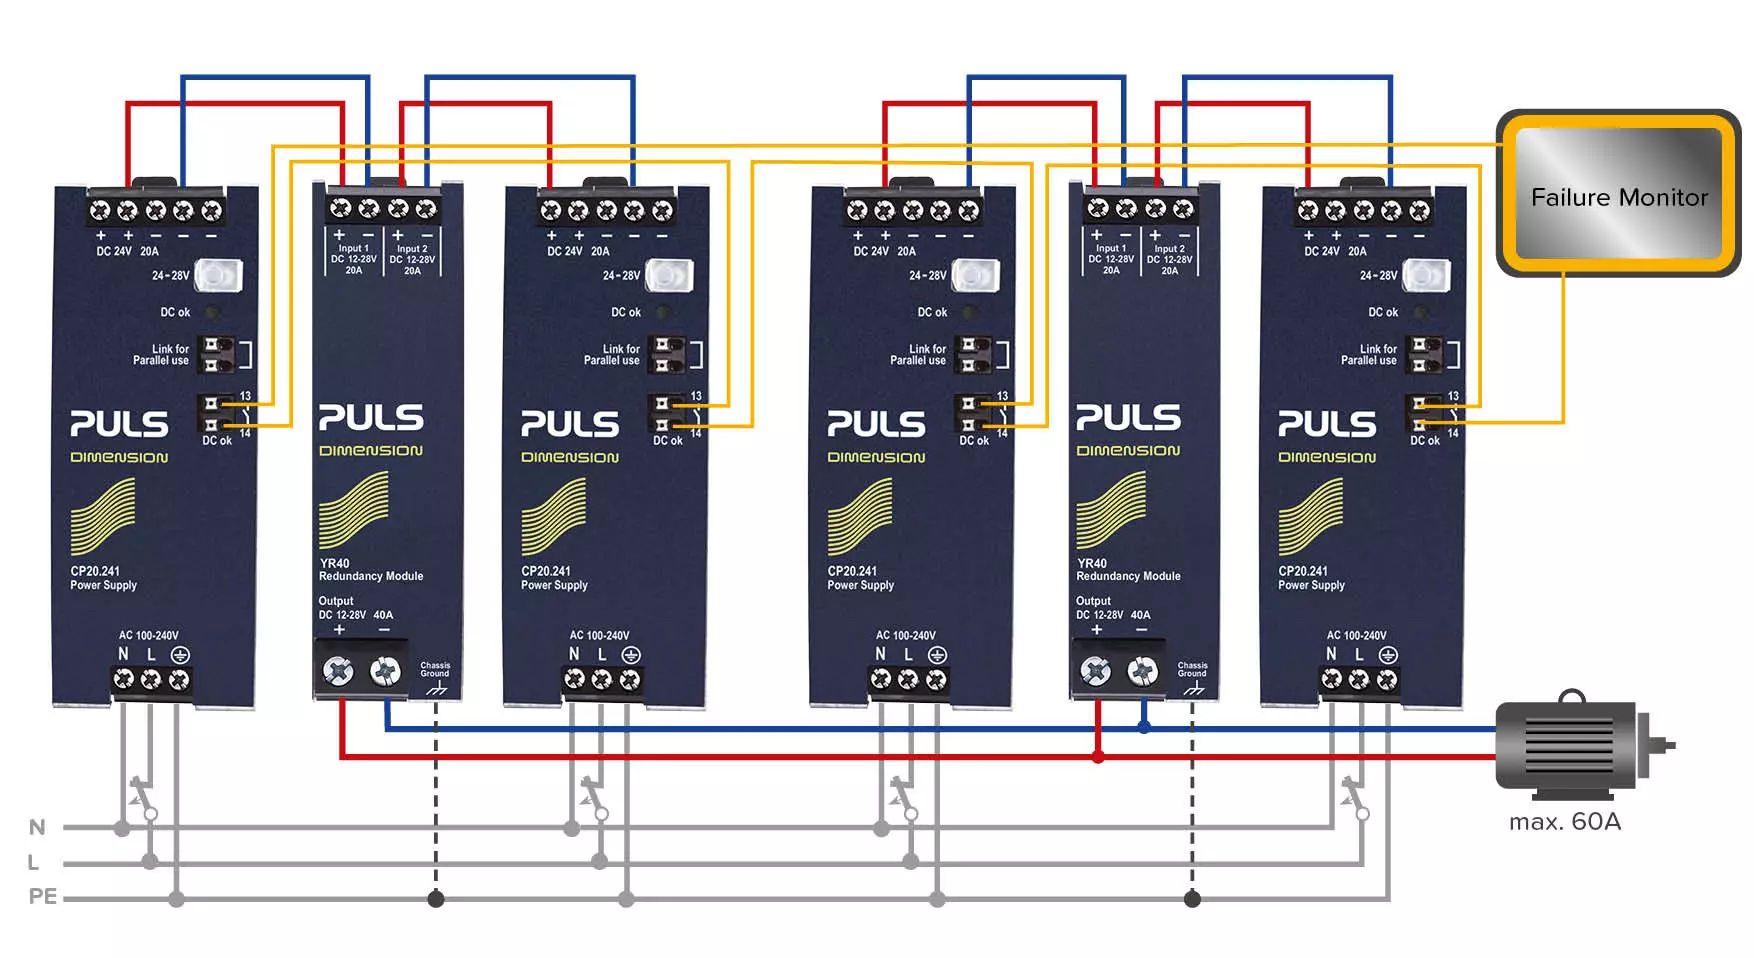 MC Parallel Connection and Redundancy of Power Supplies PULS 5 1754x958